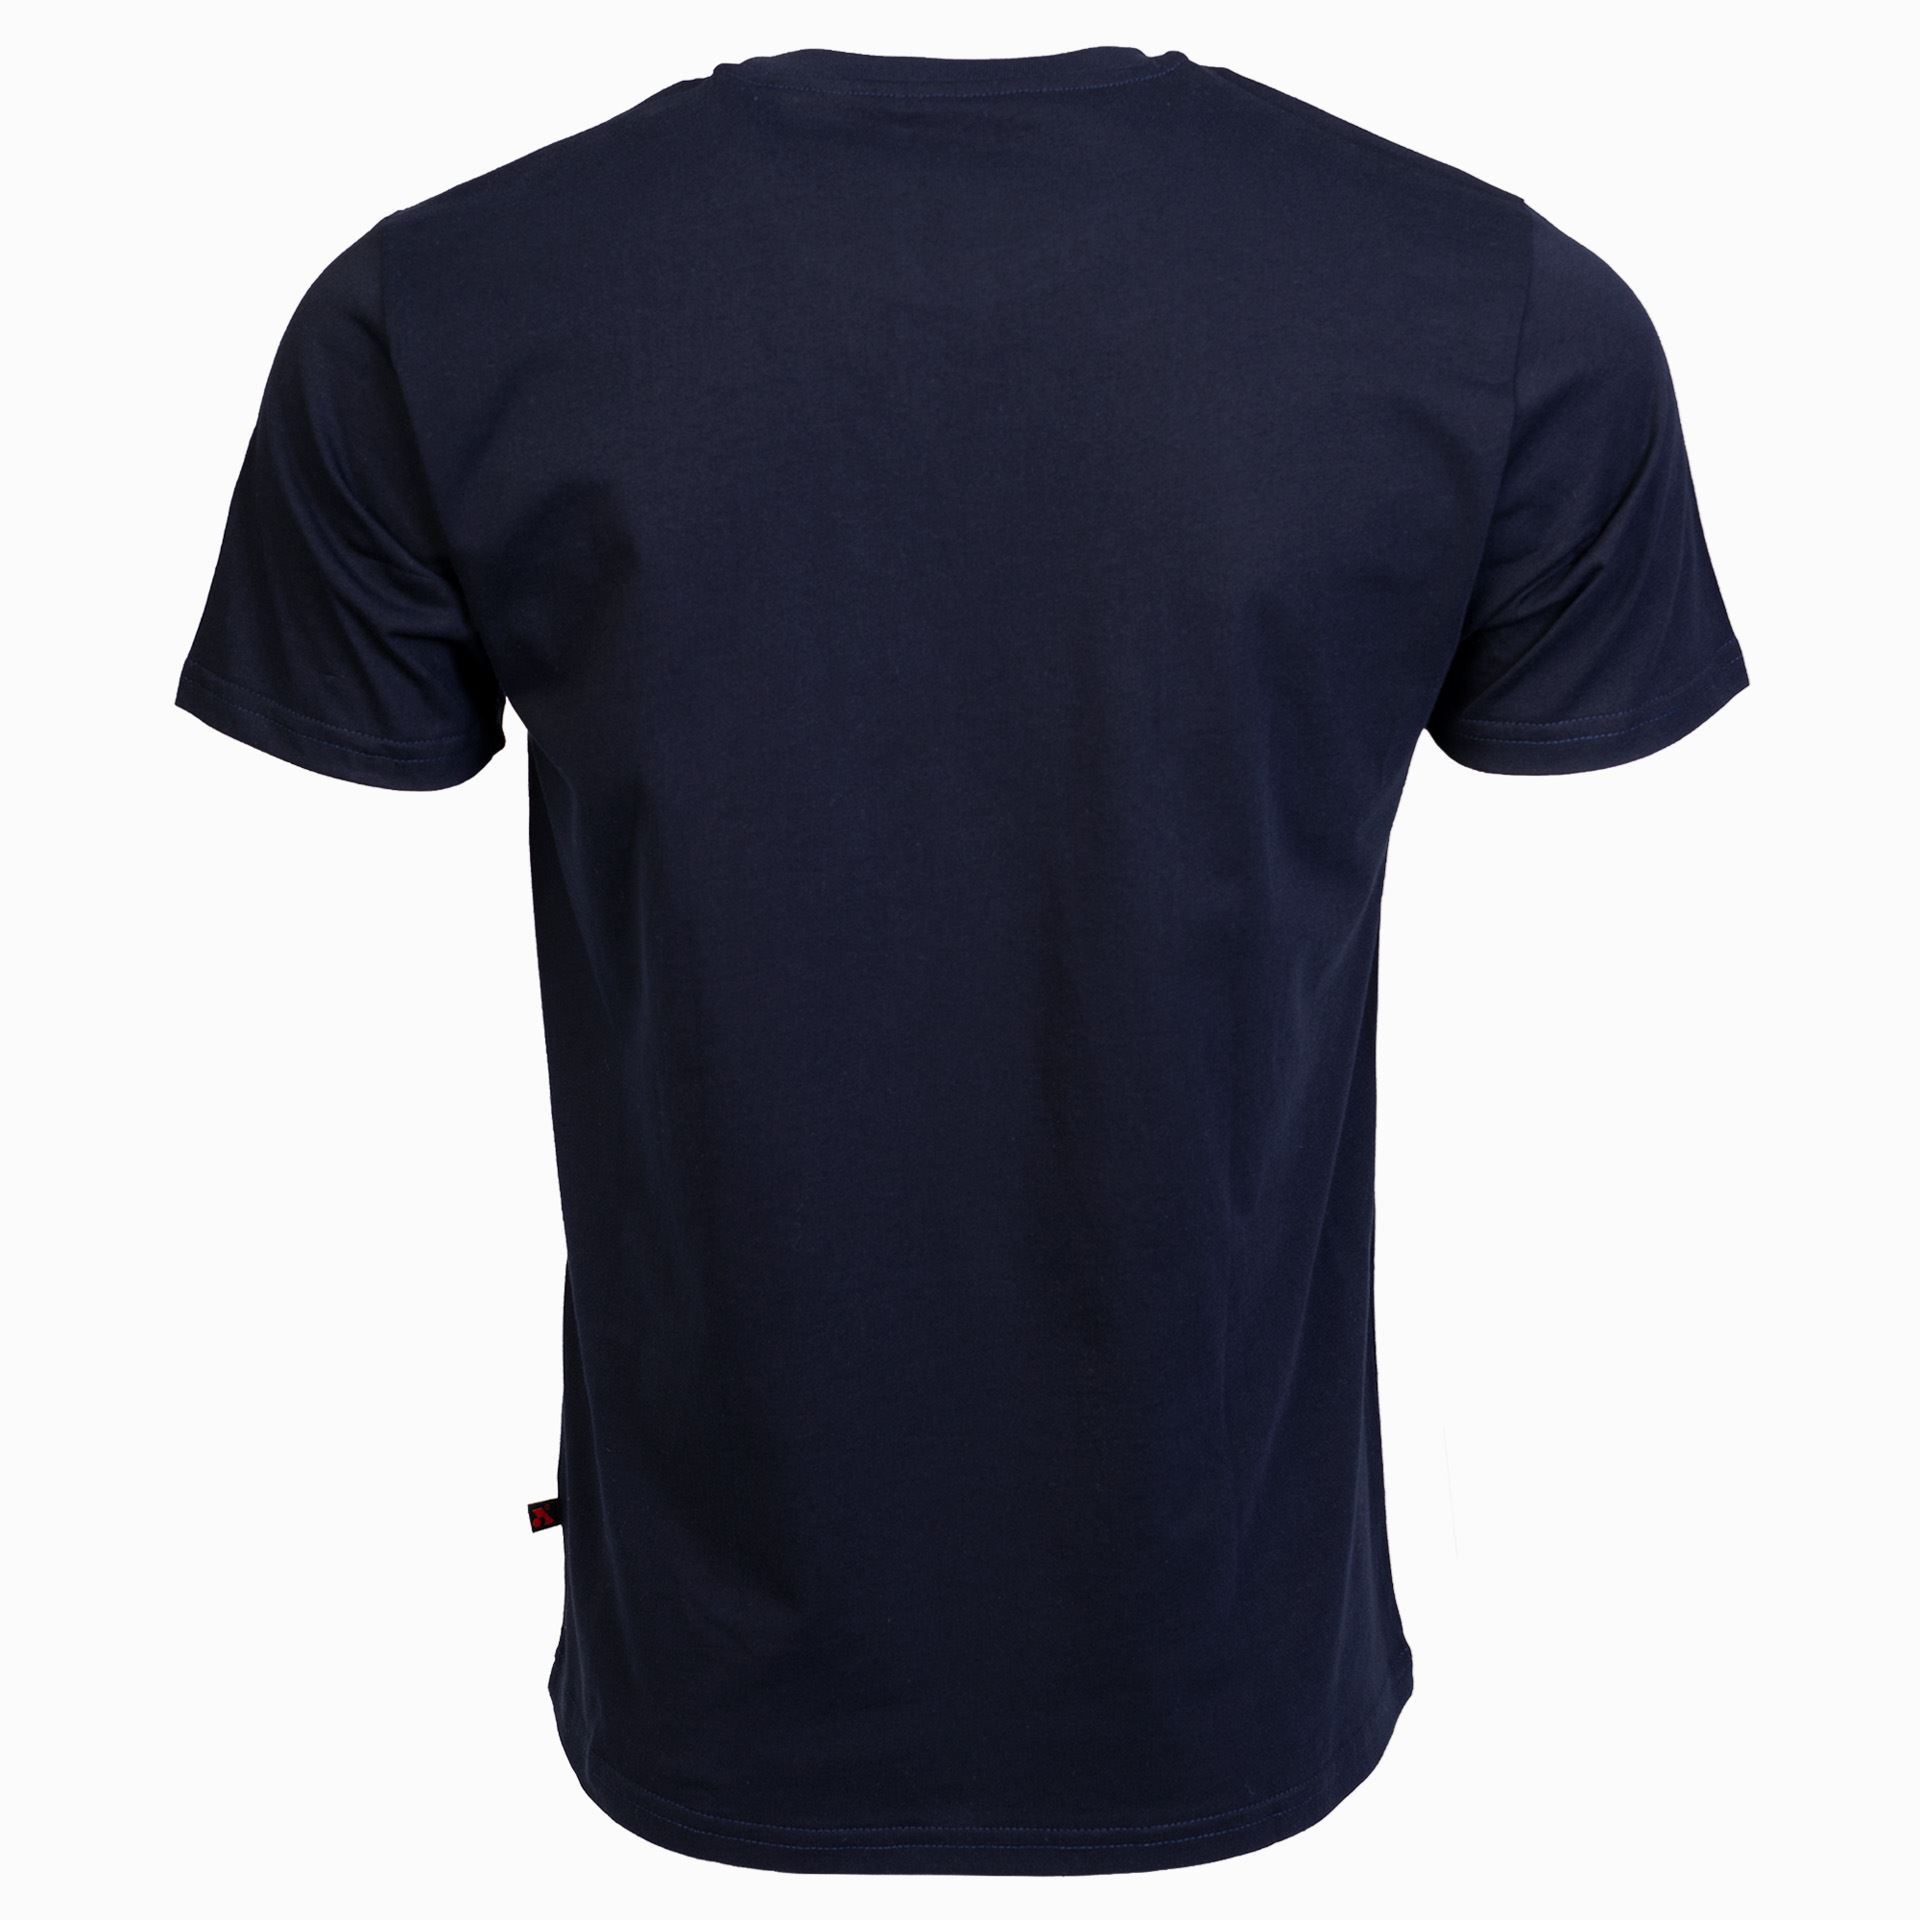 Arsenal Blue Cotton Relaxed Fit Classic T-Shirt at K-Var